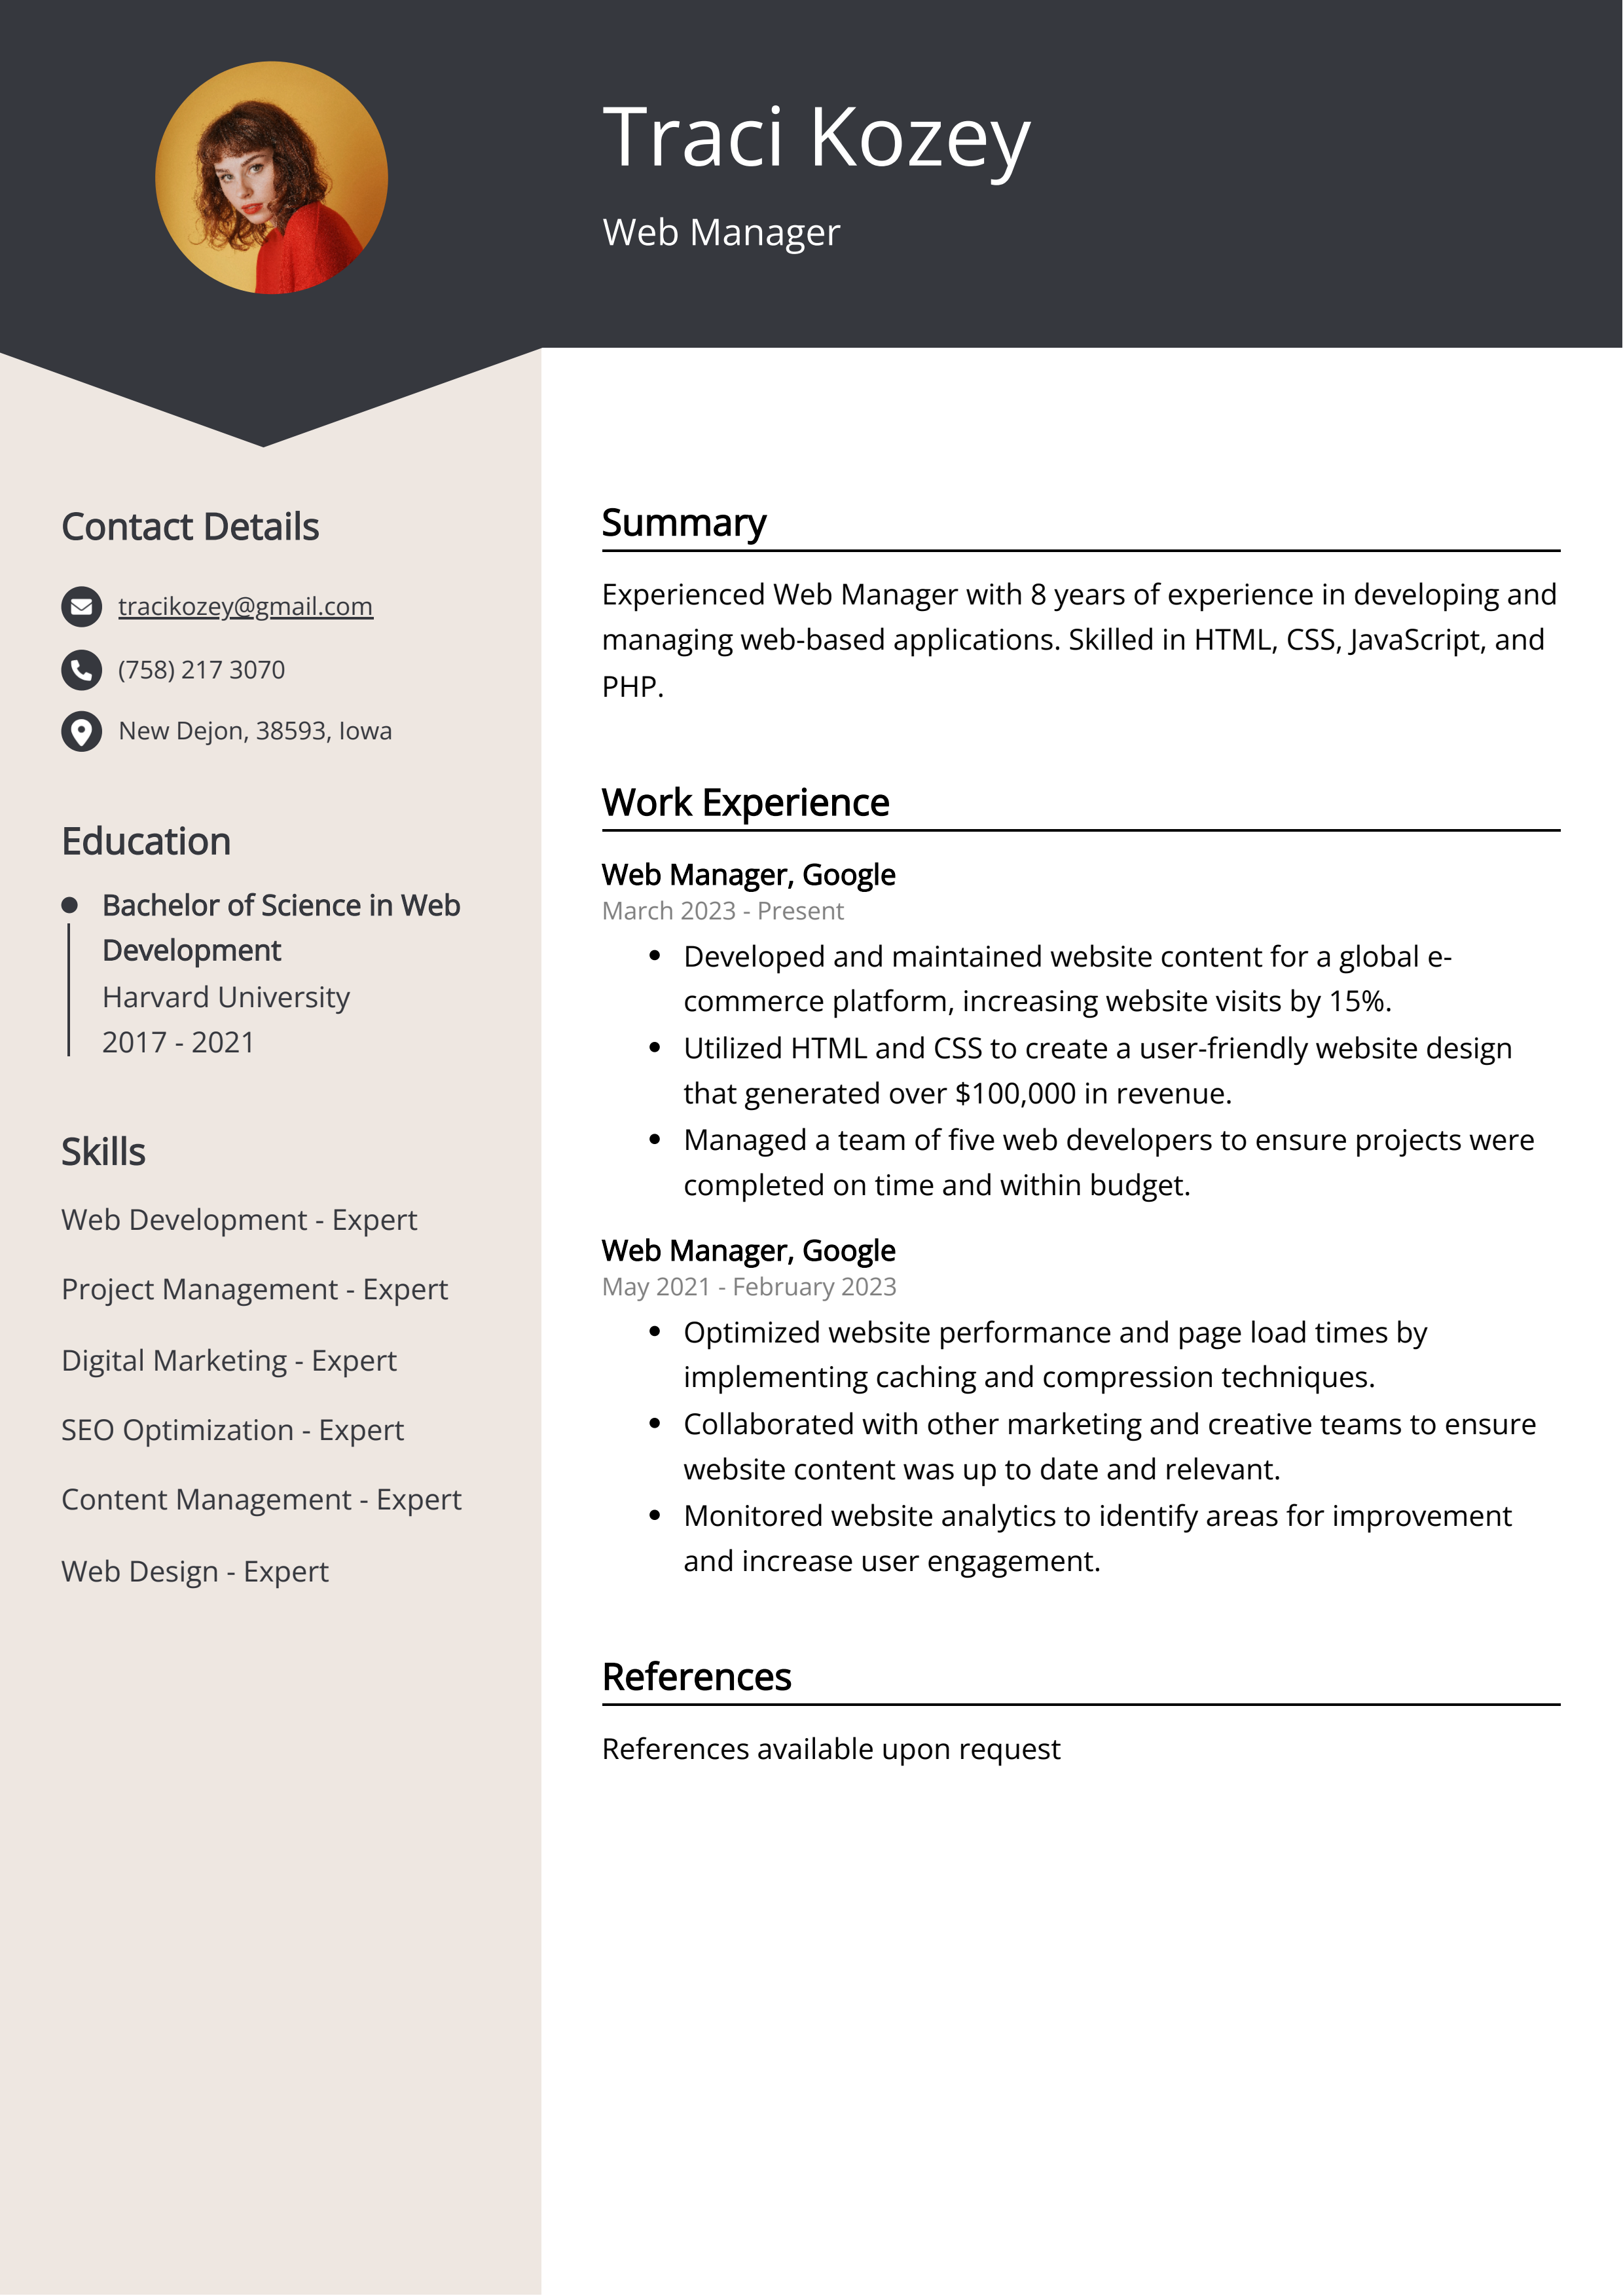 Web Manager CV Example